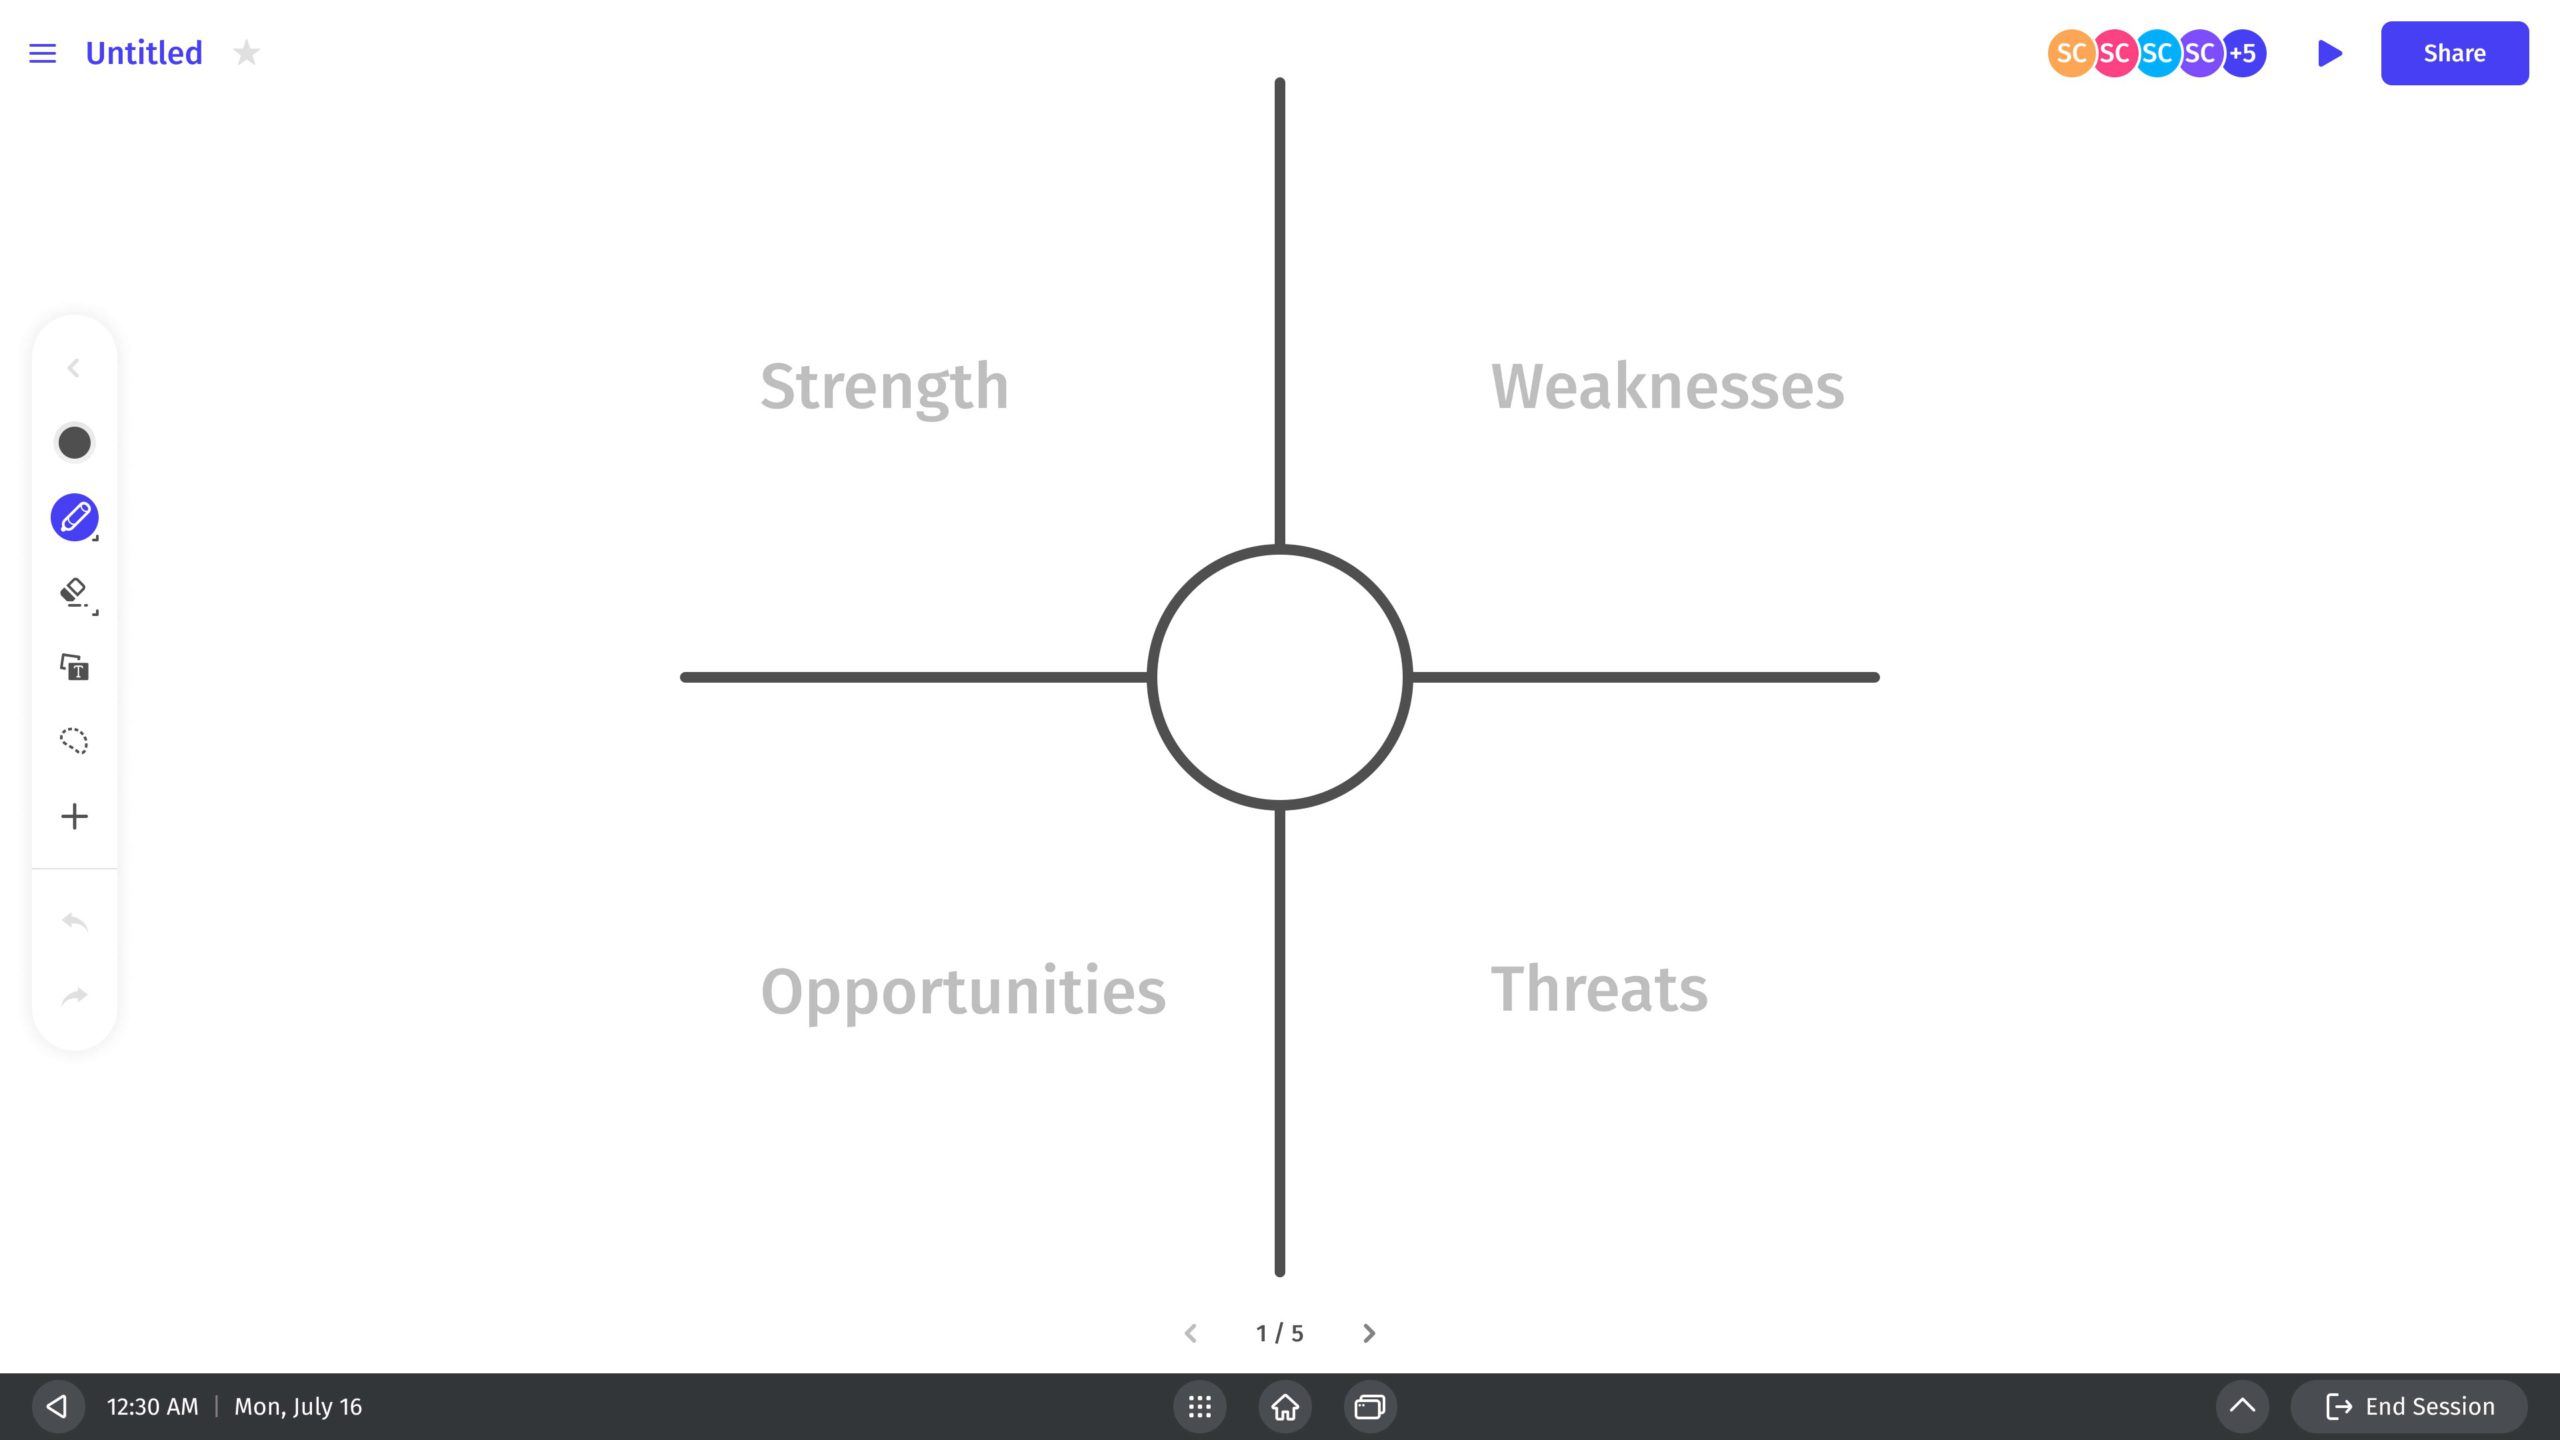 SWOT Analysis overview